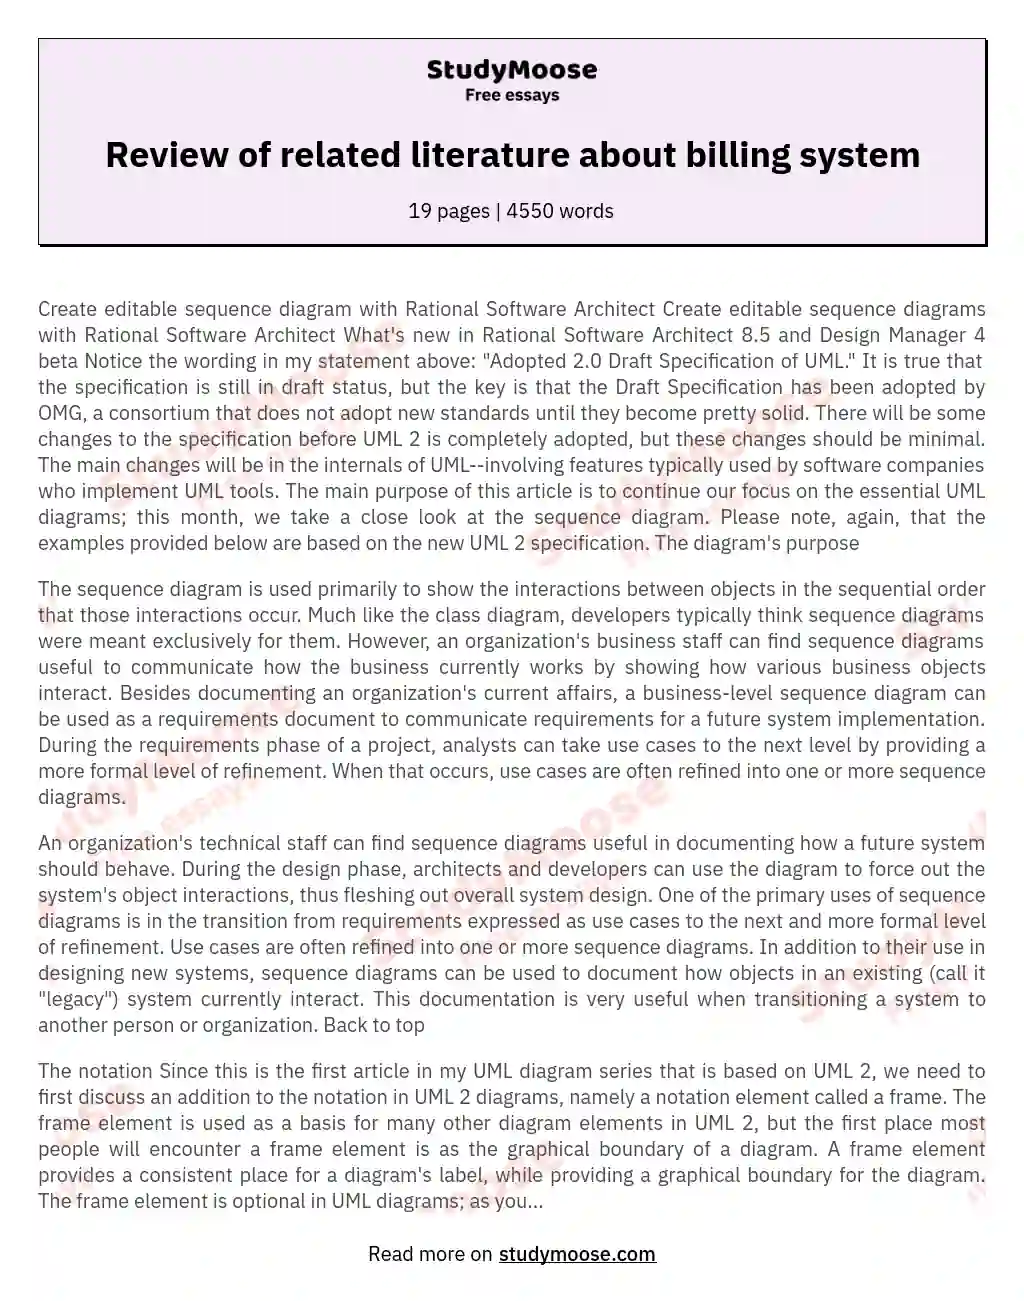 Review of related literature about billing system